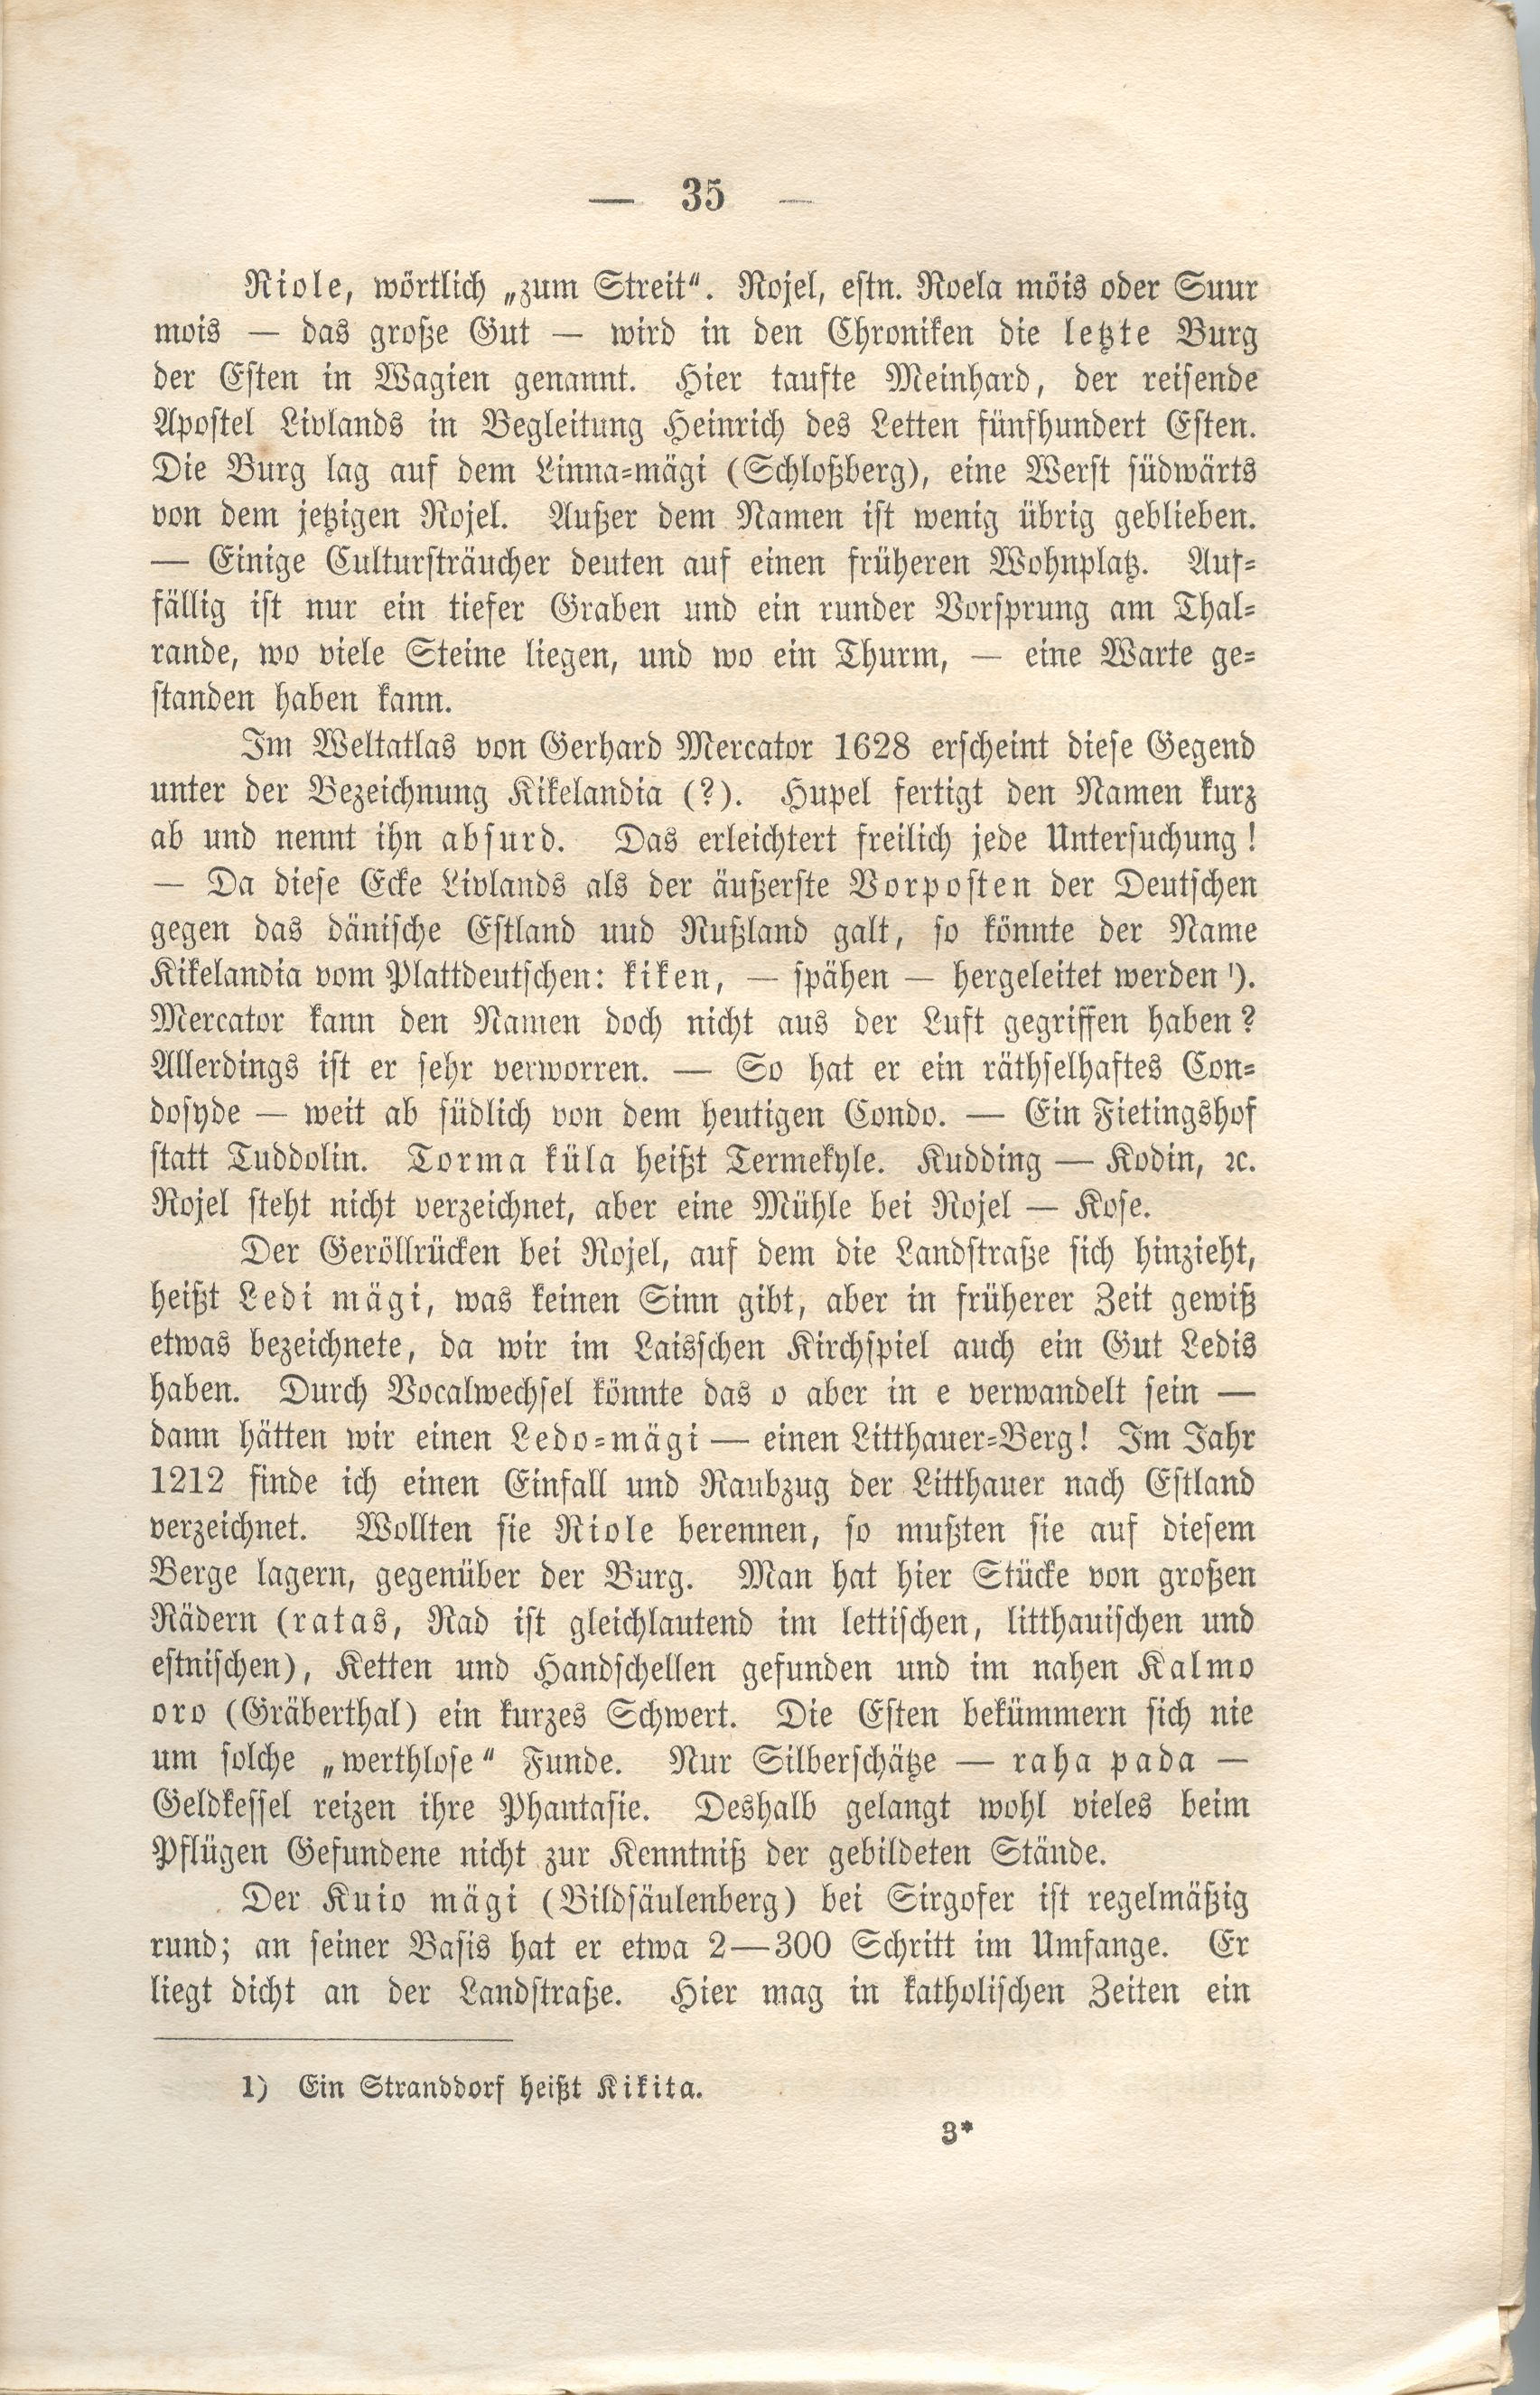 Wagien (1868) | 39. (35) Main body of text